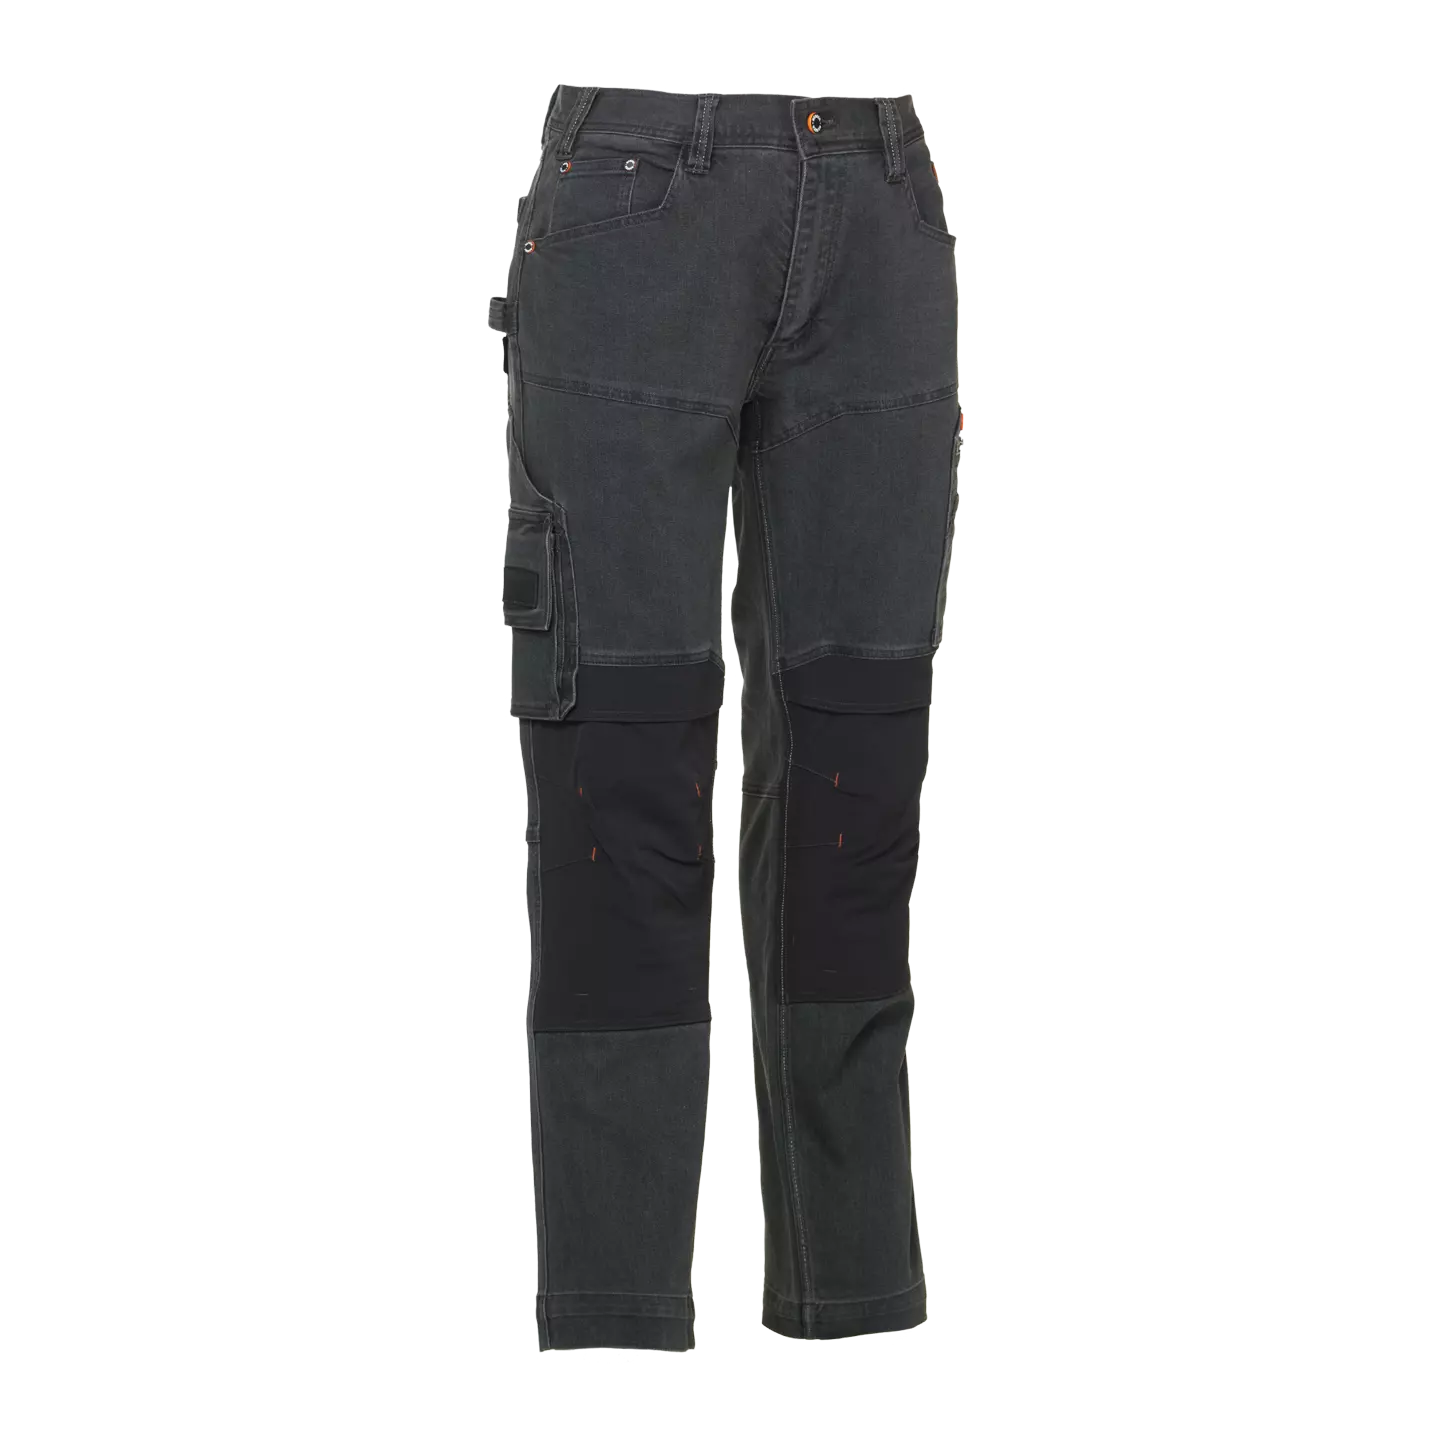 Sphinx Trousers Grey Jeans 46